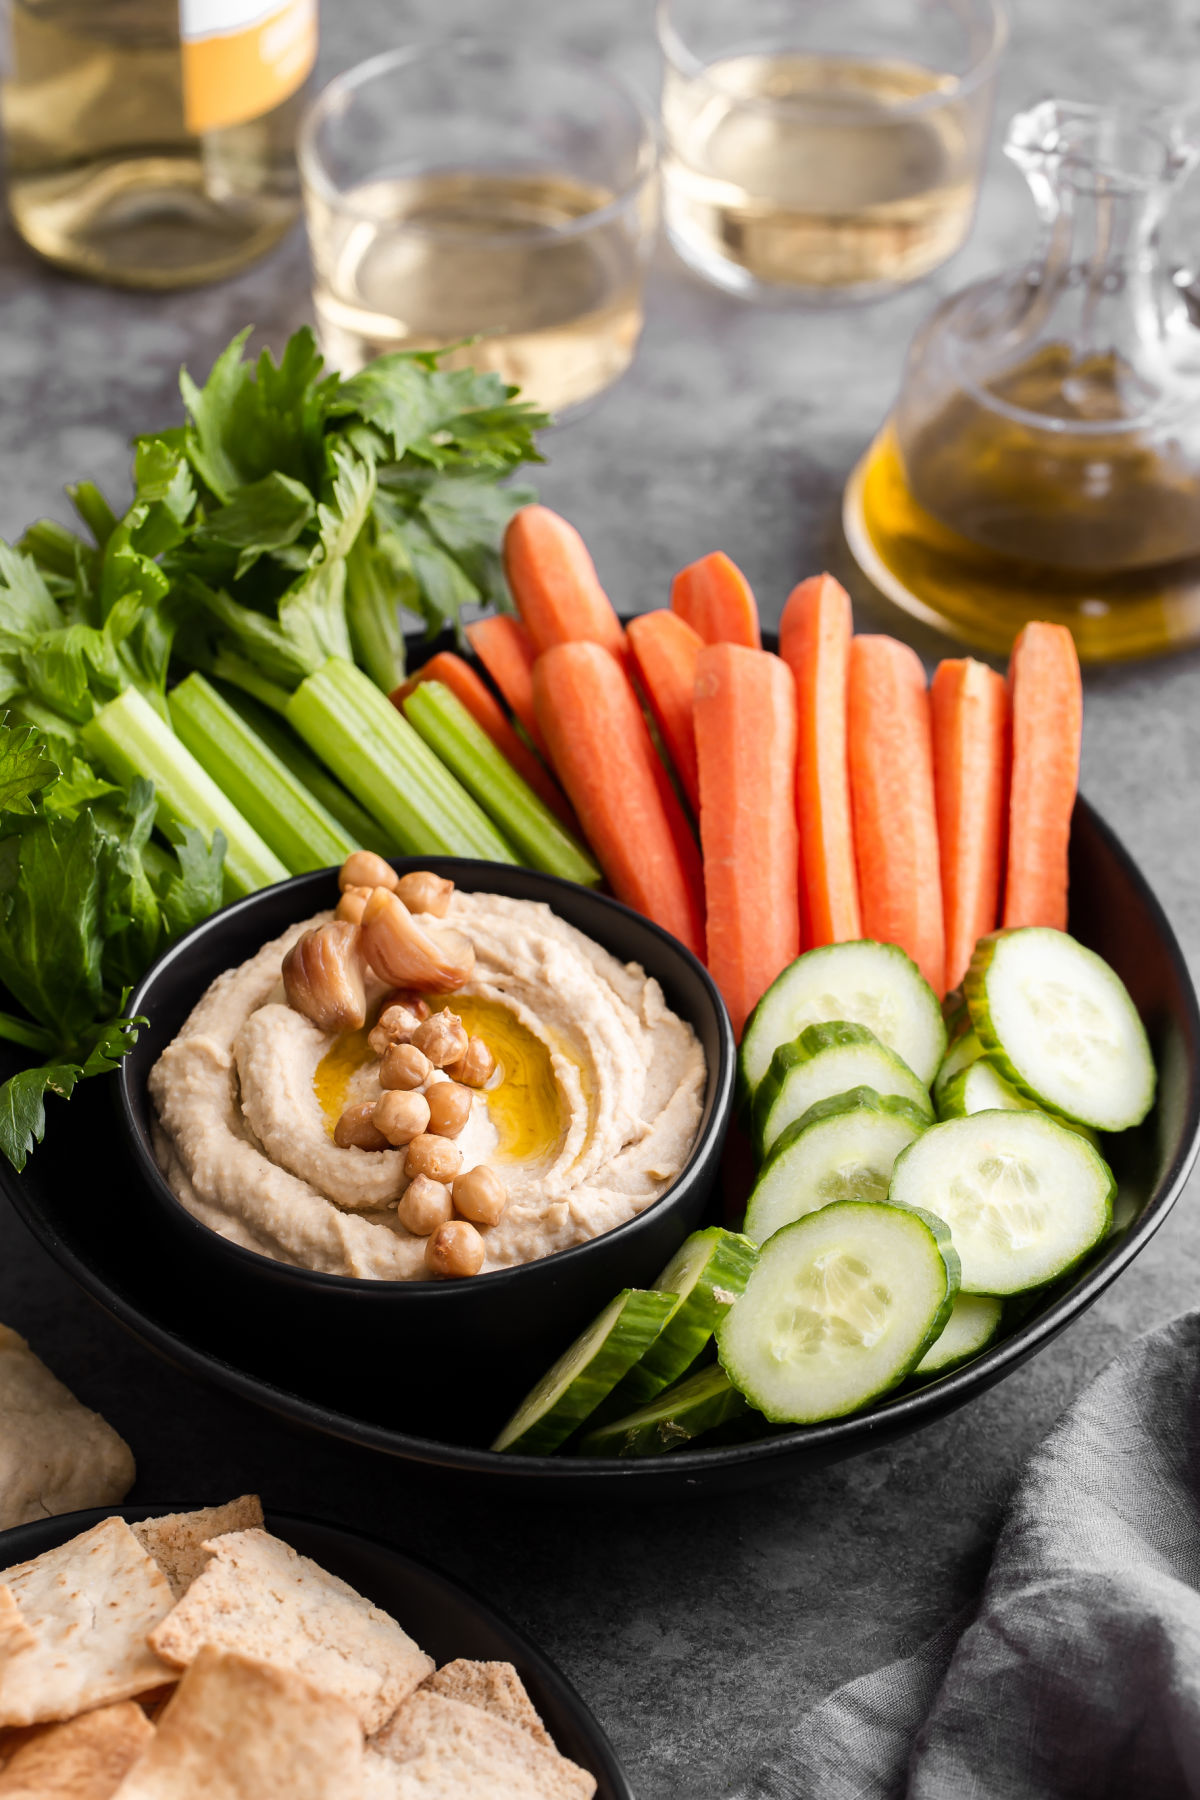 hummus in black bowl with celery, carrots and cucumber slices surrounded by wine and pita chips.